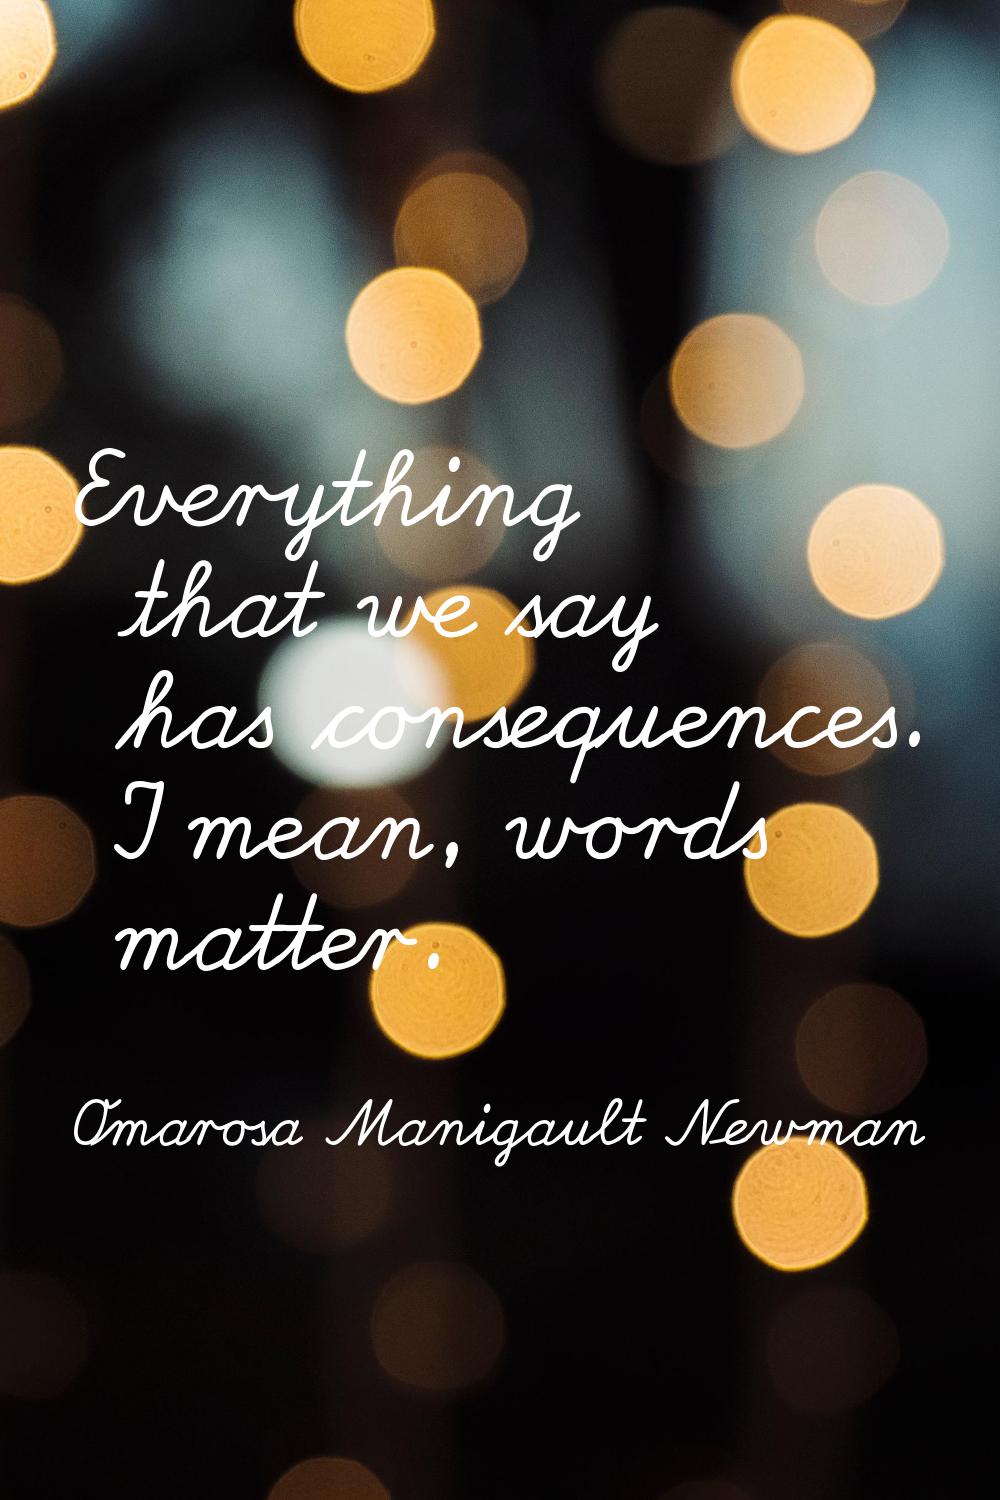 Everything that we say has consequences. I mean, words matter.